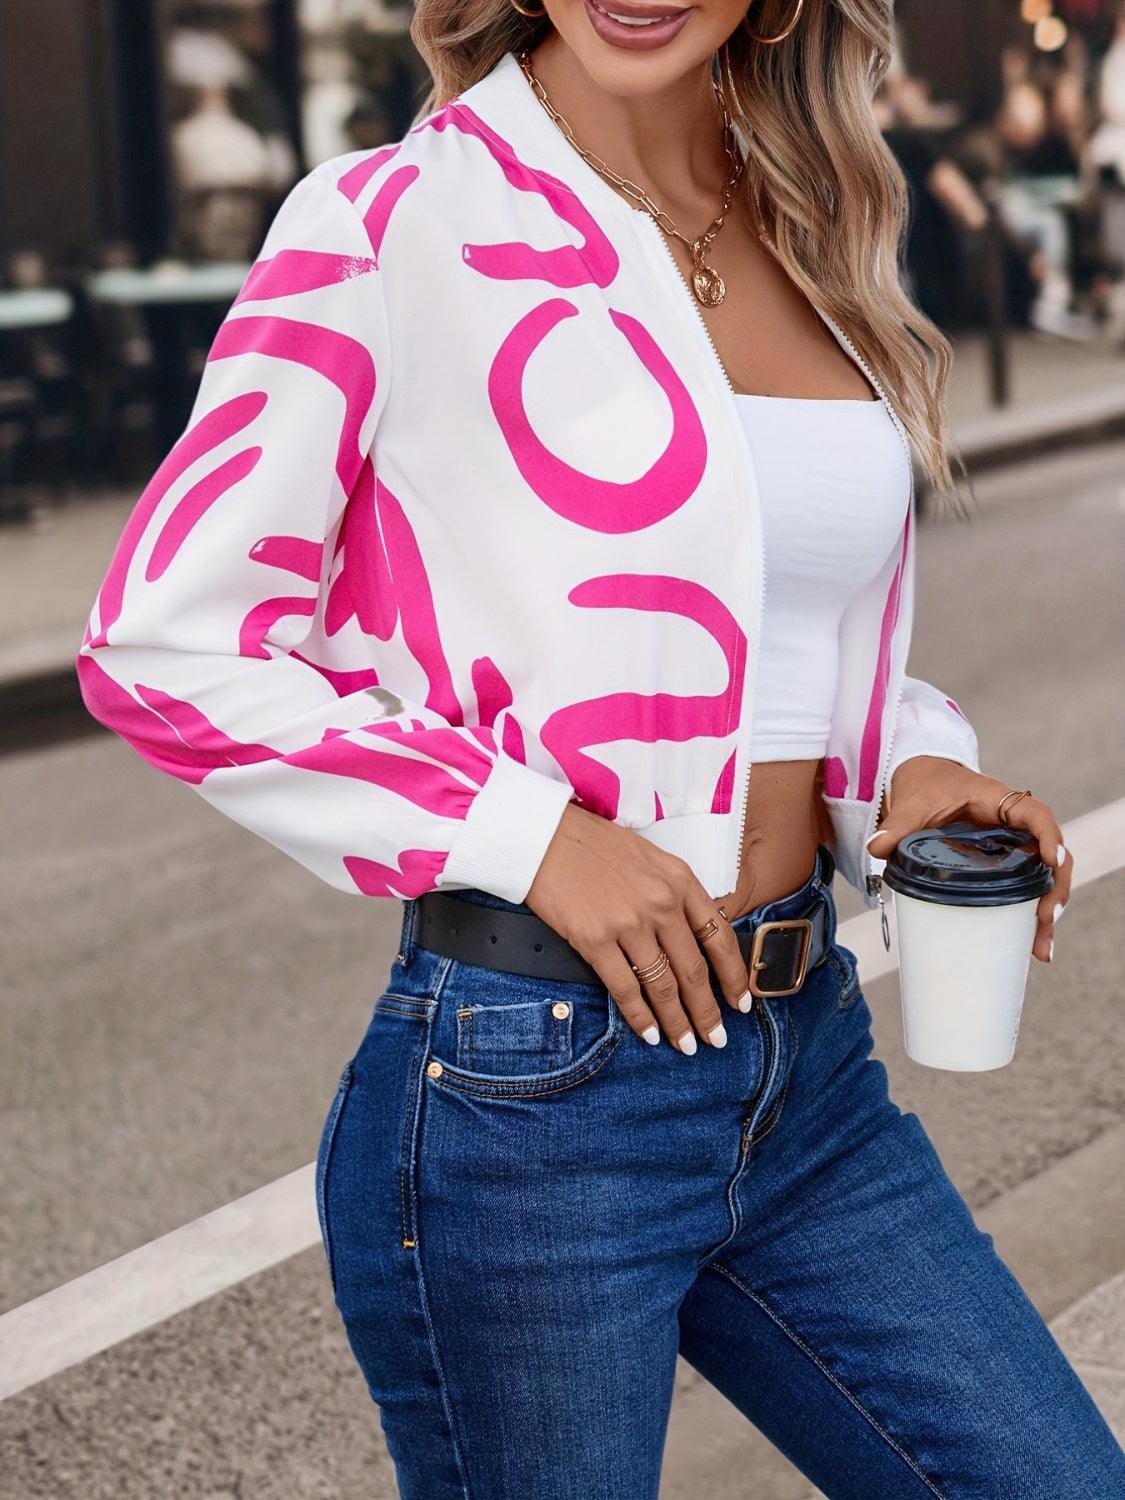 a woman in a white top and jeans holding a coffee cup